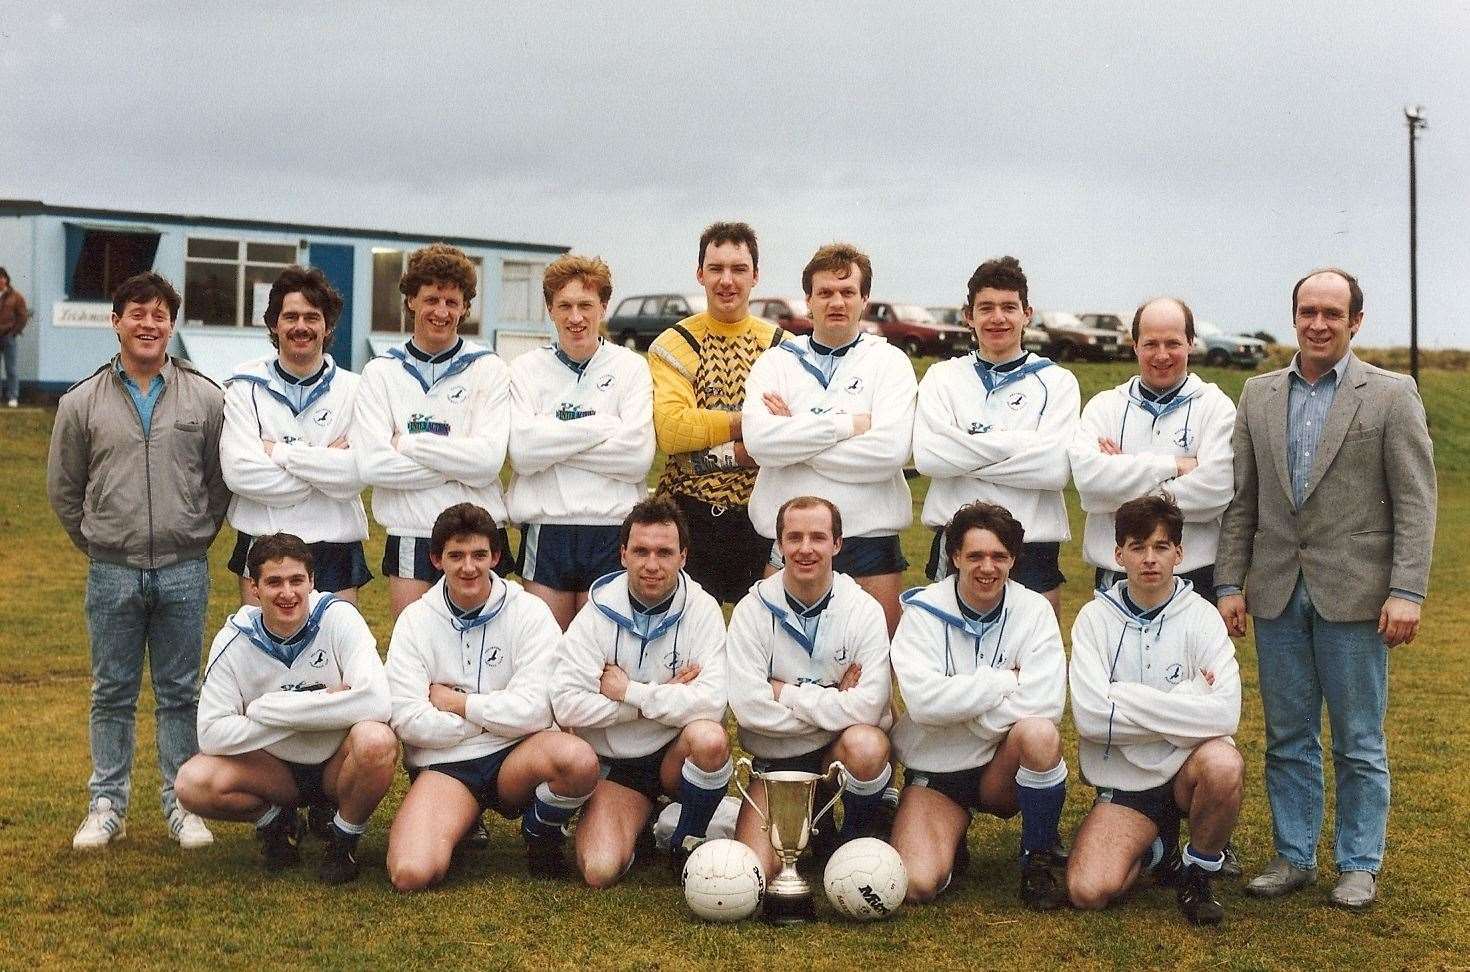 Balintore football club enjoyed a number of cup successes during the 1980s. Photo: James Oliver